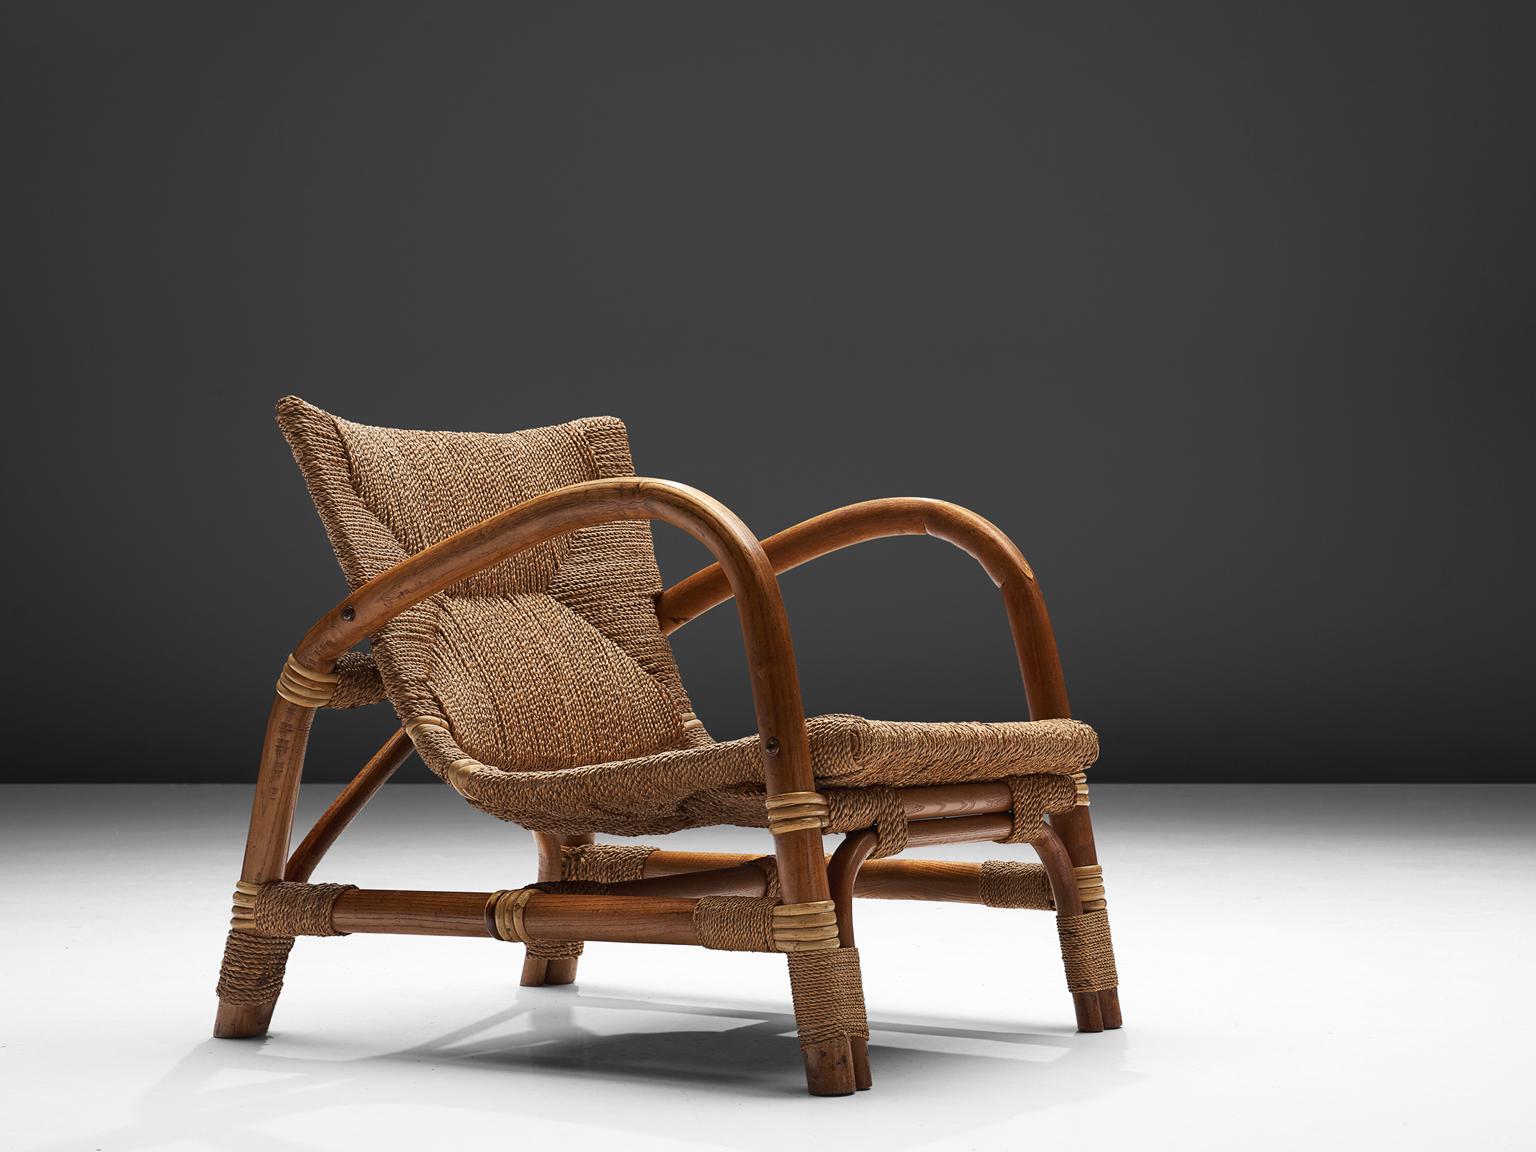 Wicker armchair, cane and beechwood, The Netherlands, 1960s

This well designed lounge chair has an open character. The warm expression of the two materials combined work well. The backseat overflows in the seat. The woven cane upholstery shows